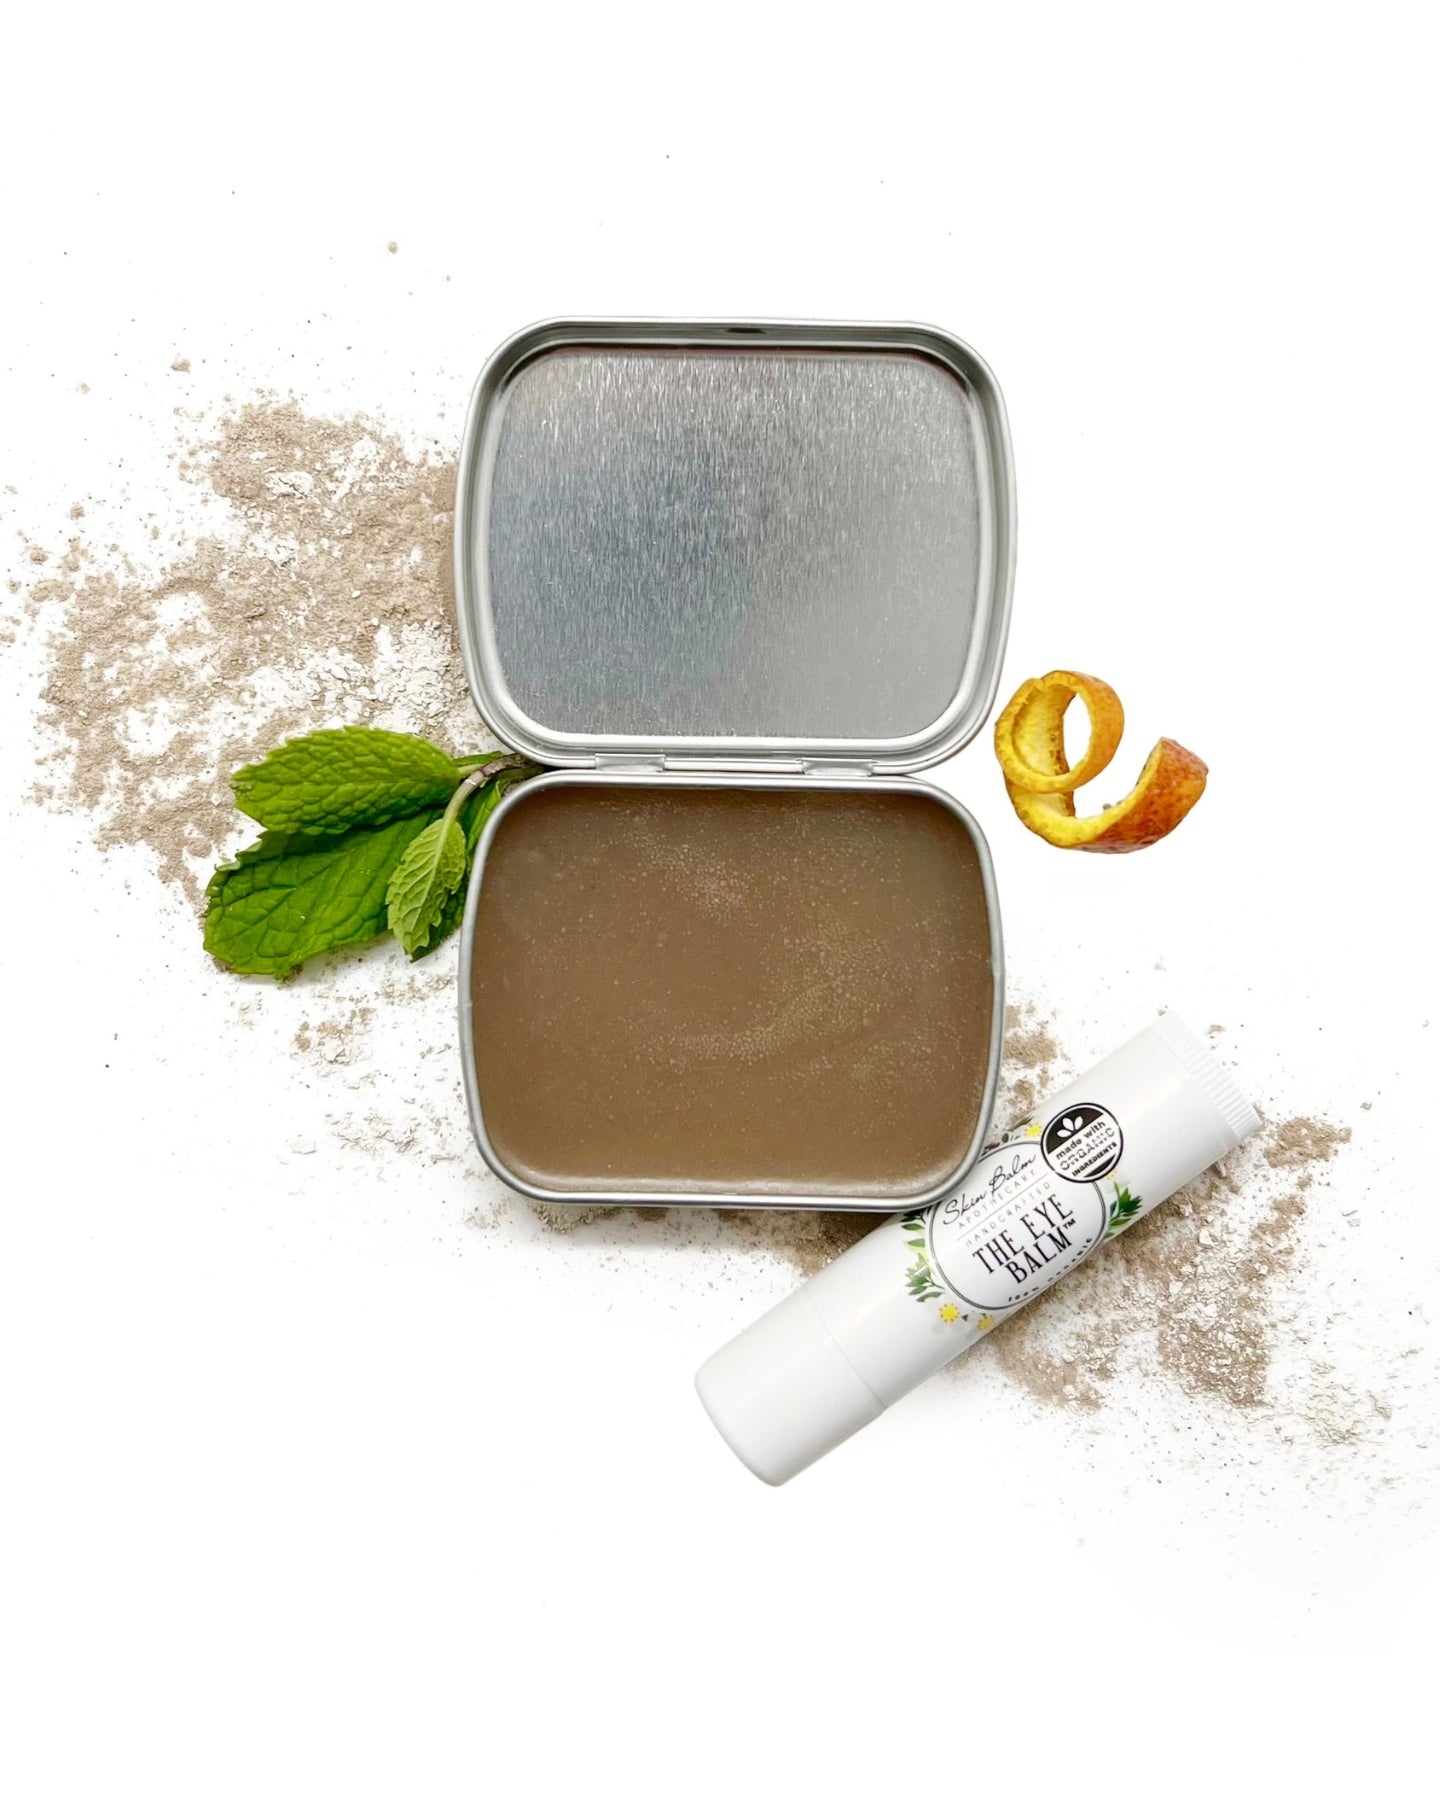 Brow Styling Wax & Clay with The Eye Balm™ against a white background.